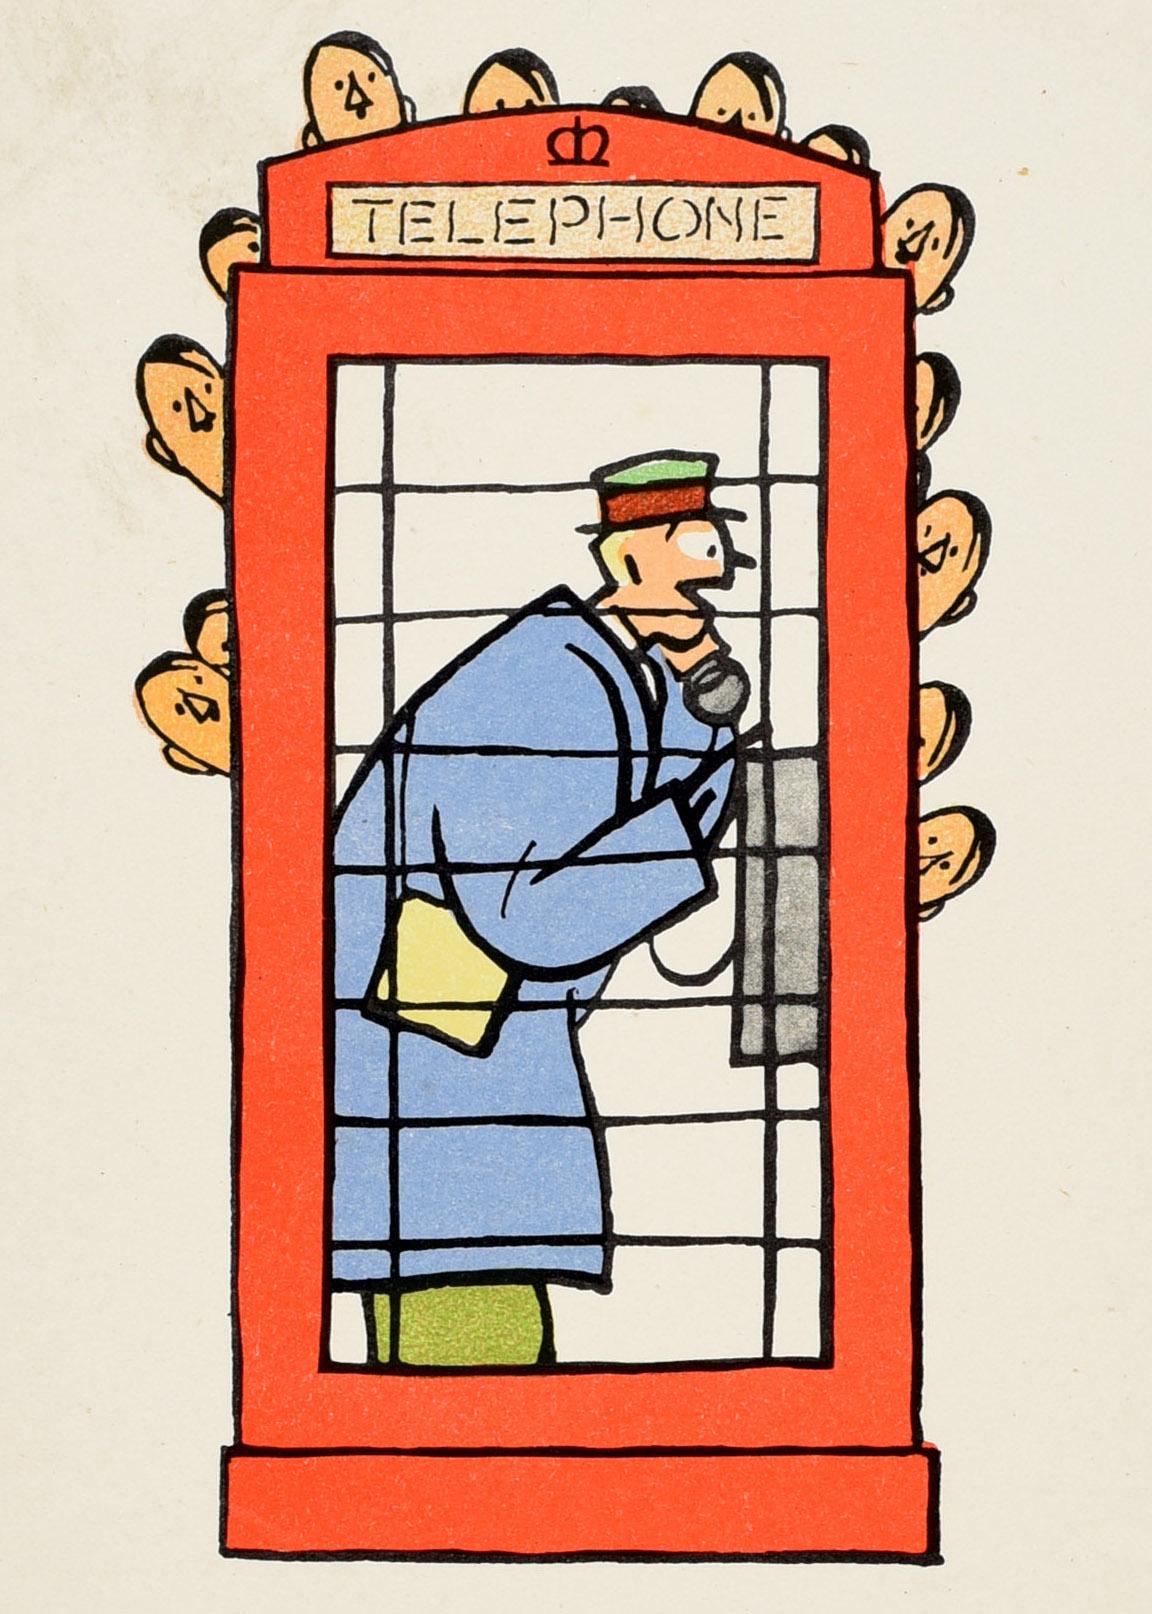 Original Vintage WWII Poster Careless Talk Costs Lives Telephone Box Fougasse - Print by Fougasse (Cyril Kenneth Bird)